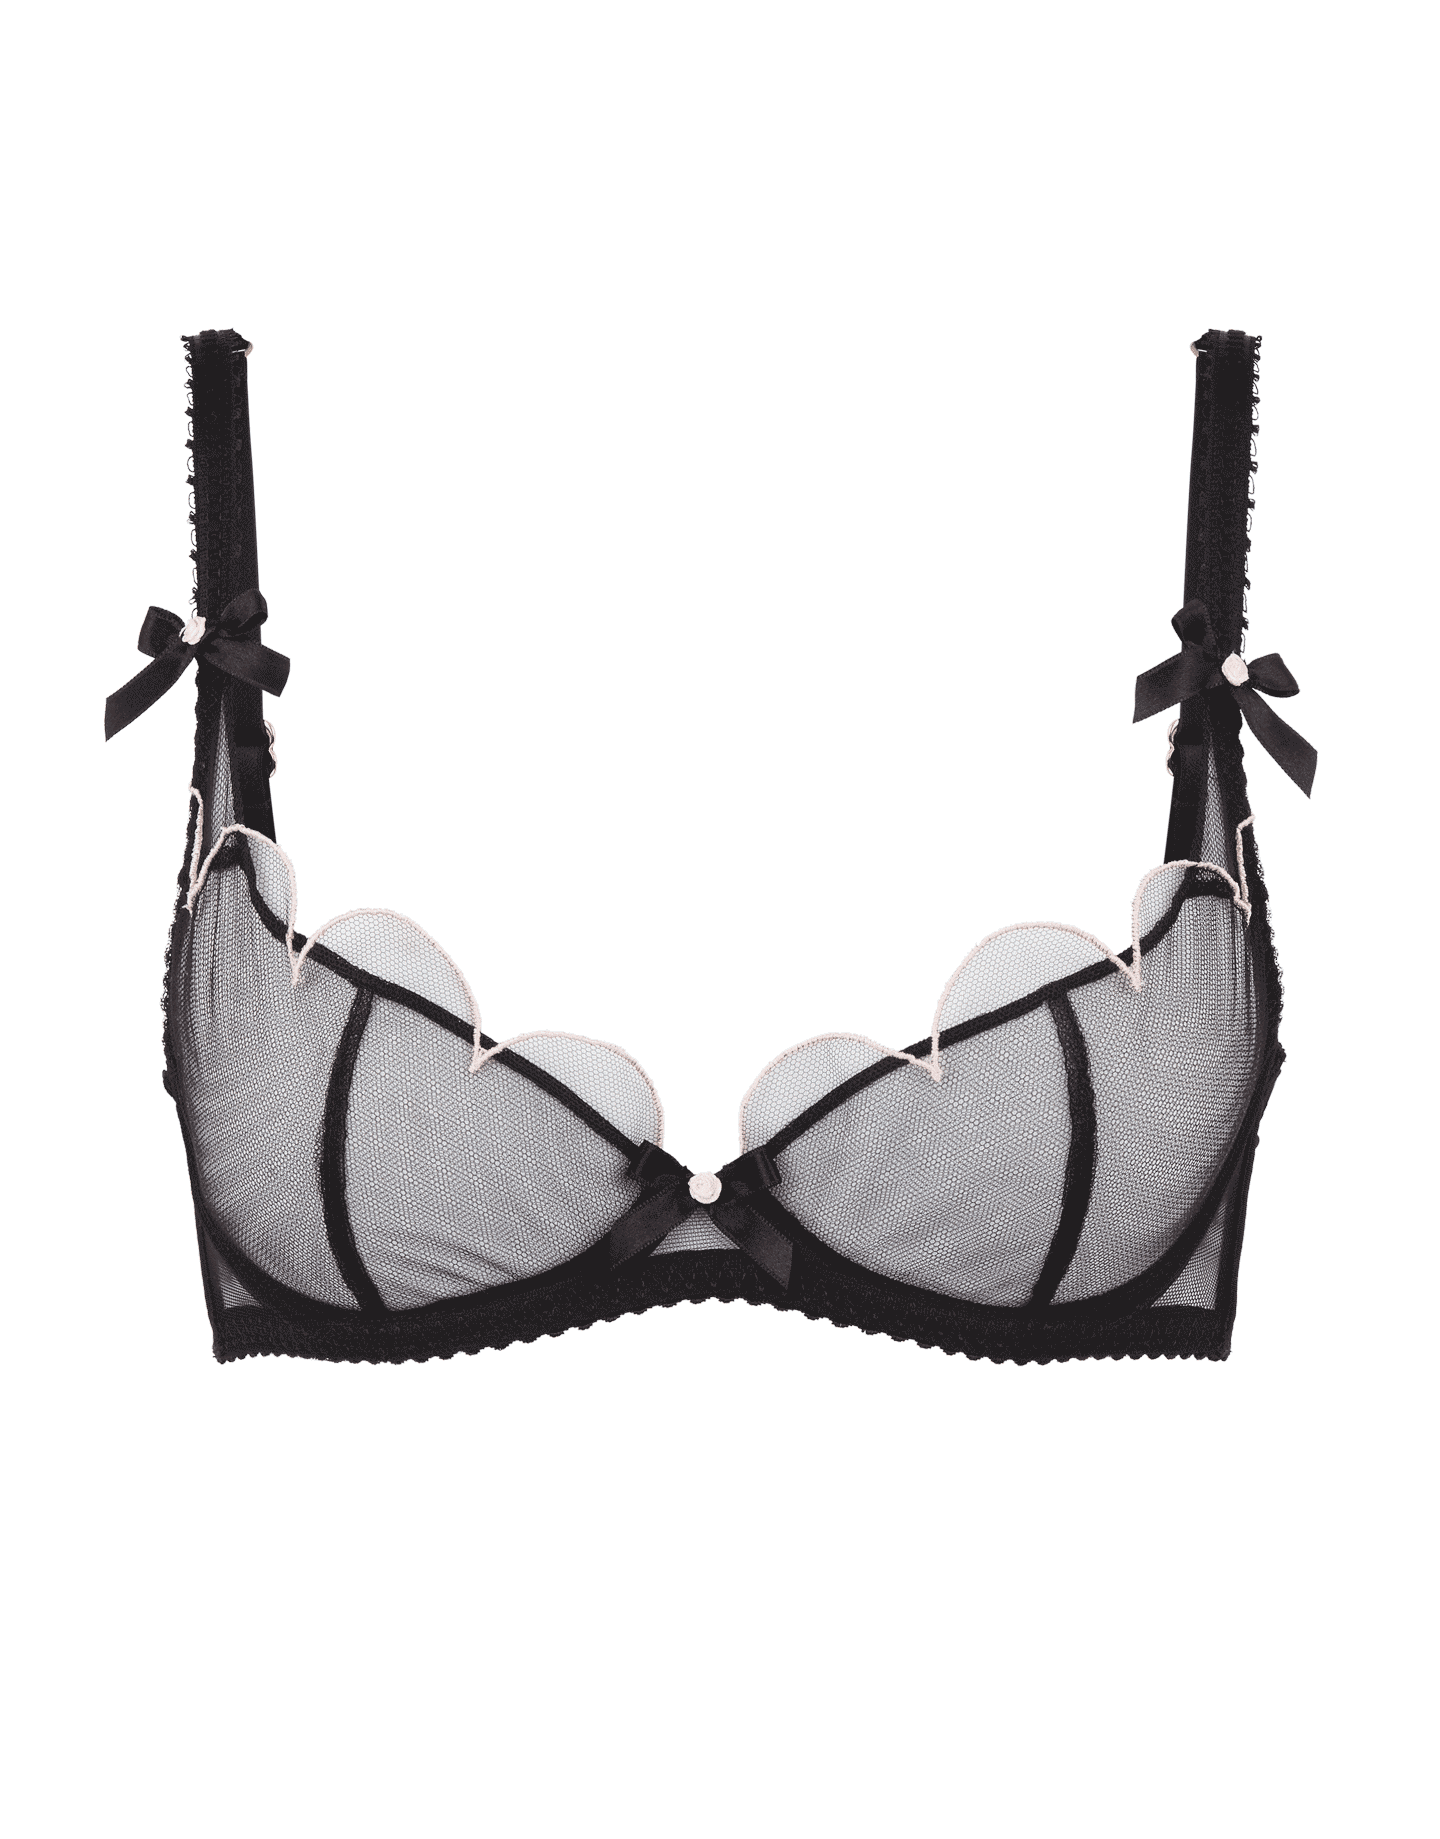 Lorna Demi Cup Plunge Underwired Bra in Black | Agent Provocateur Outlet